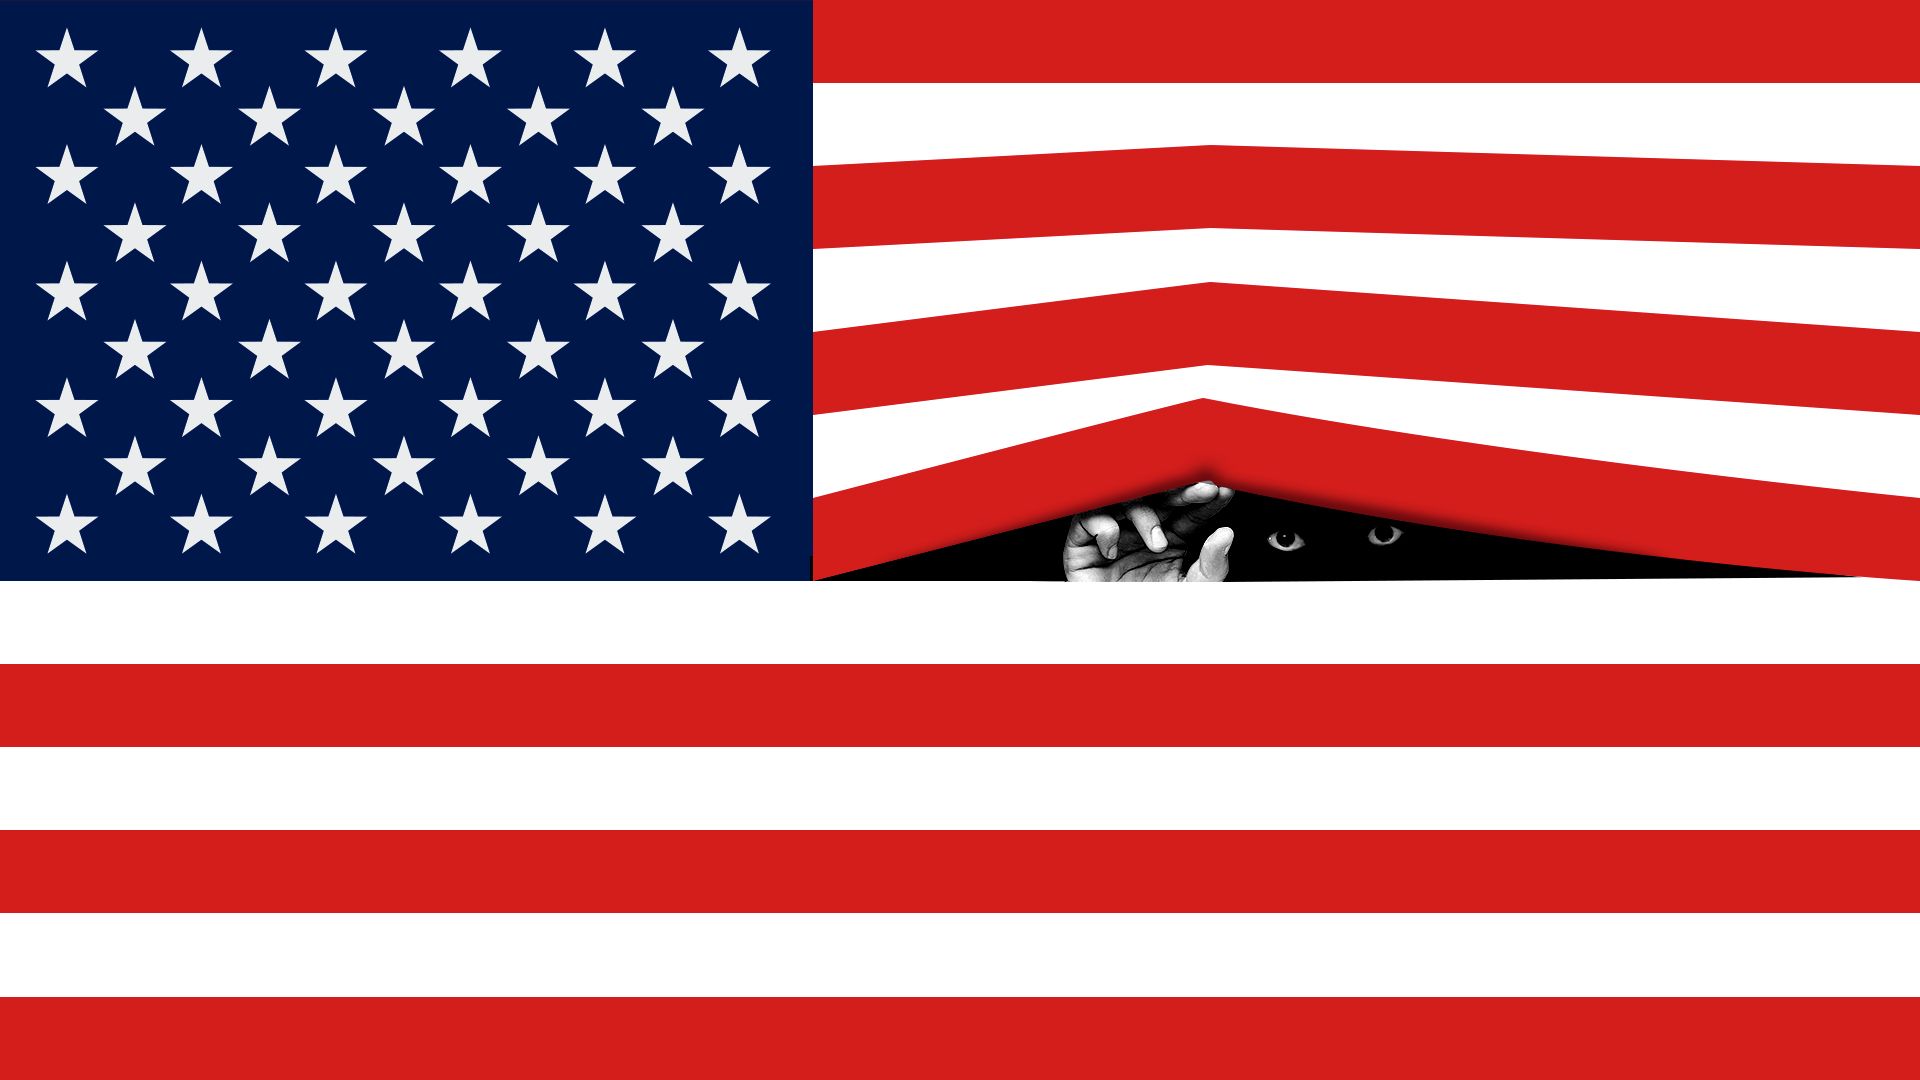 Illustration of the American flag with a hand reaching through as if the stripes were blinds, and a pair of eyes peeking through.